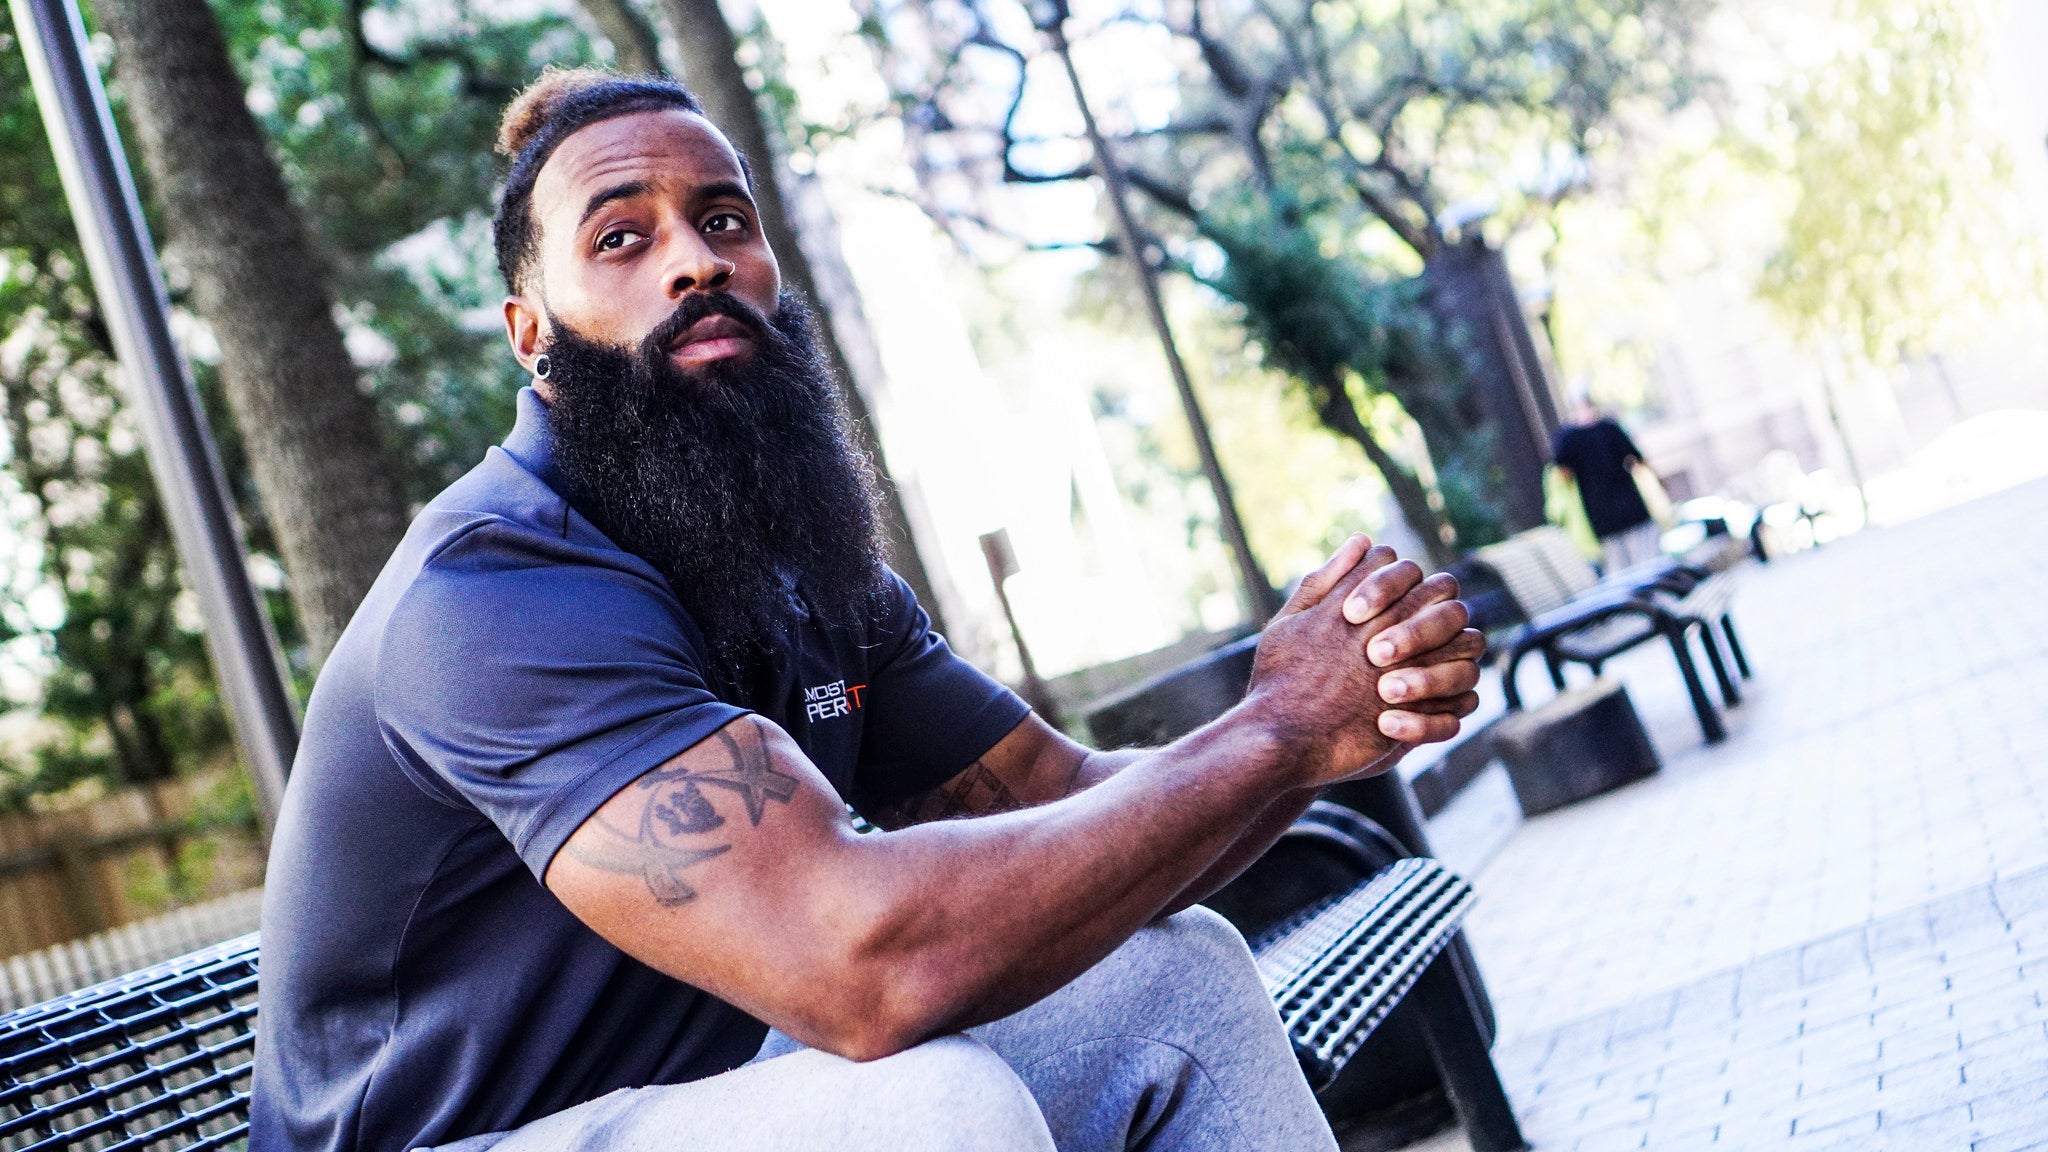 #MCE: These Black Men With Beards Are Here To Make Your Day
